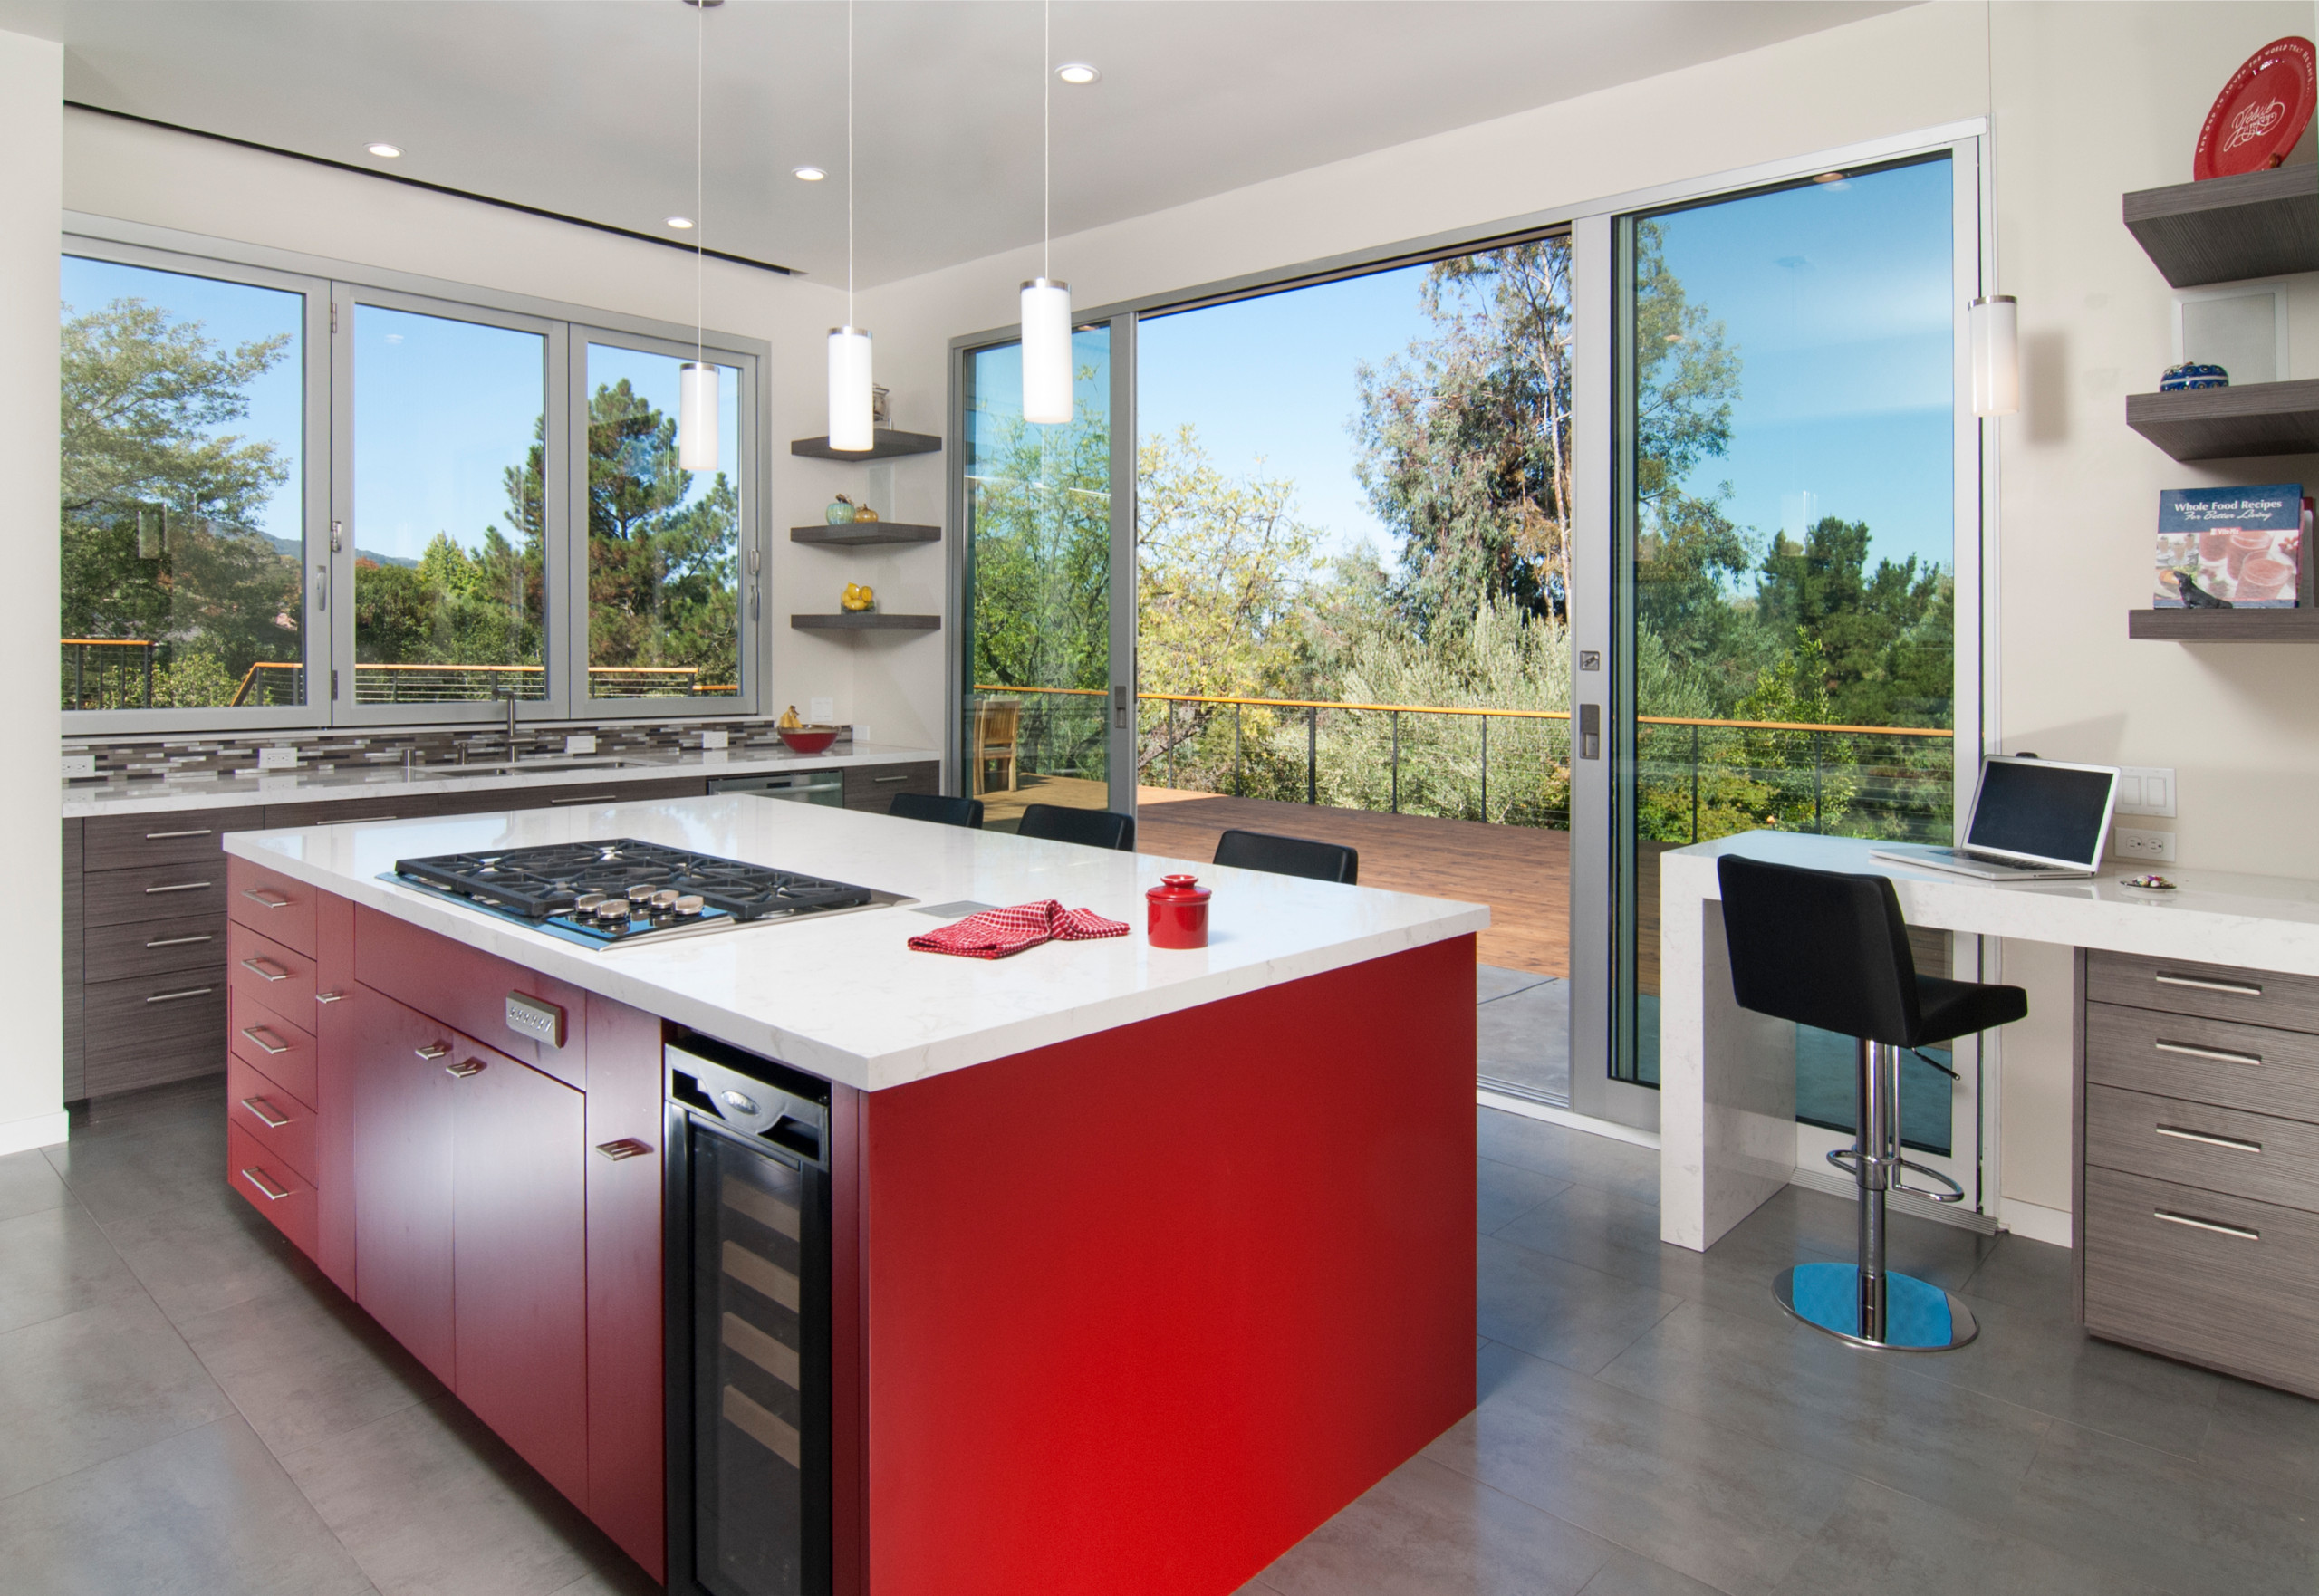 57+ Red Kitchen Cabinets (EXTREMELY HOT) - Stylish Red Cabinets